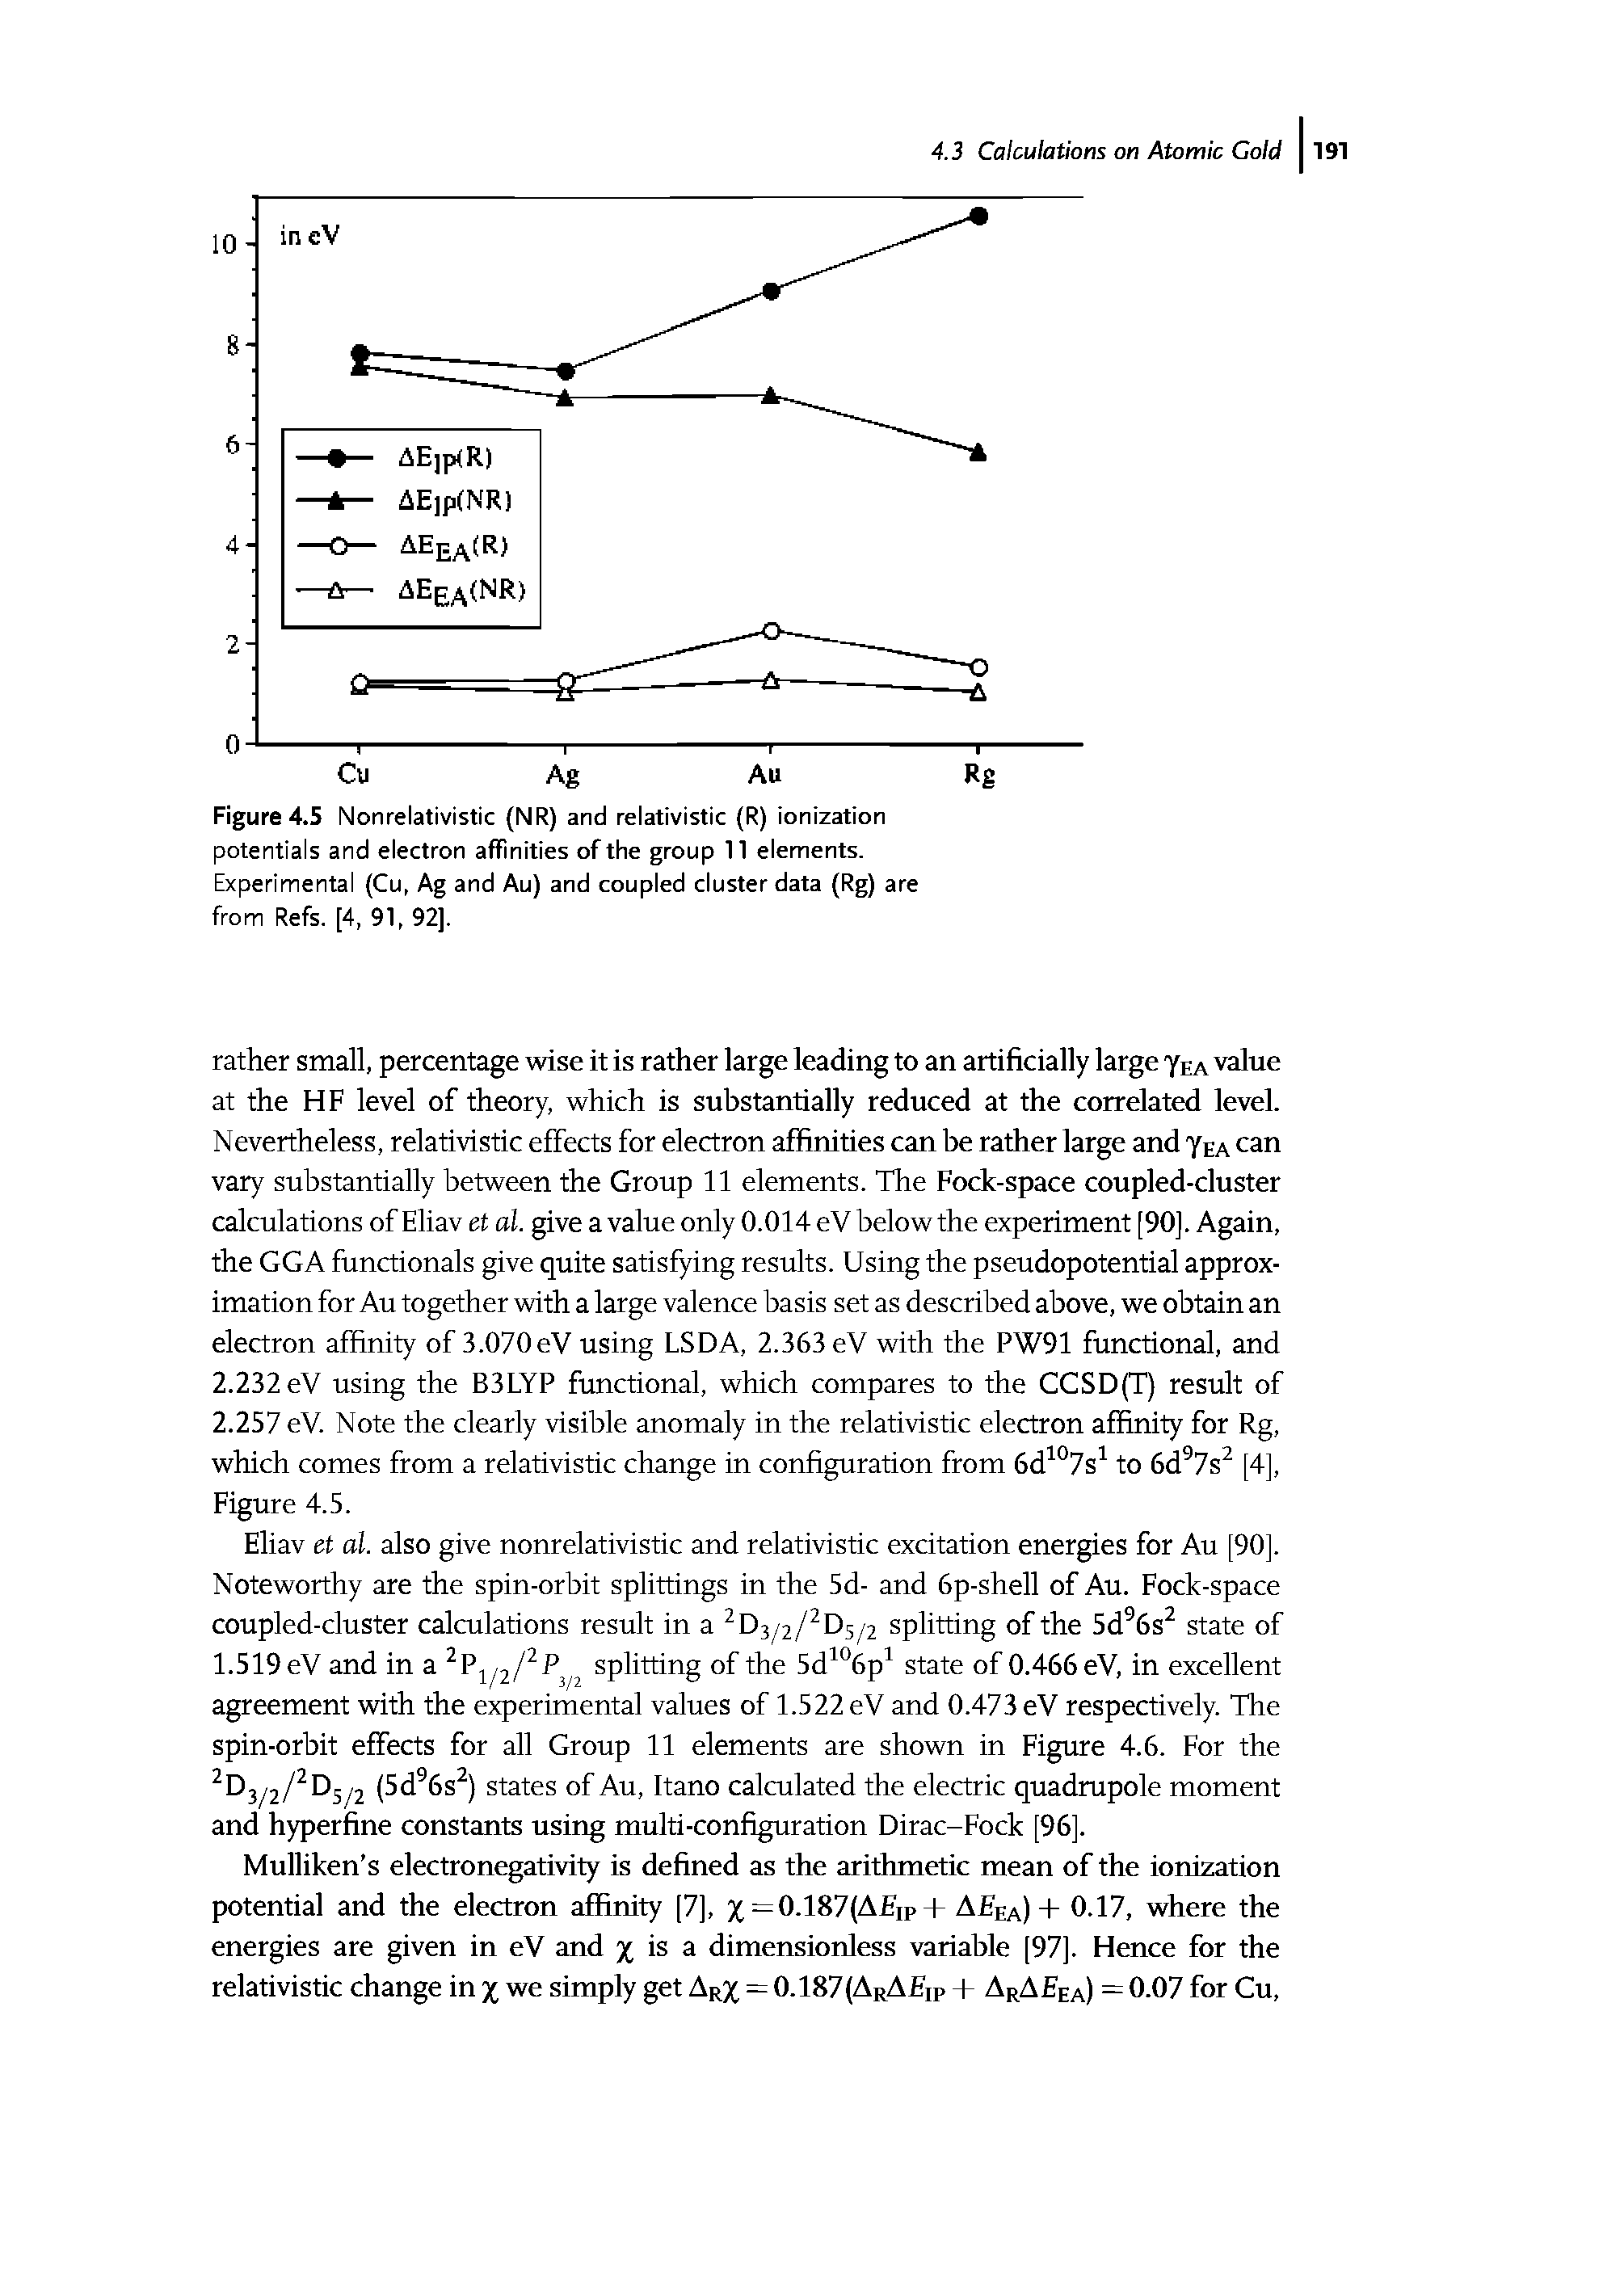 Figure 4.5 Nonrelativistic (NR) and relativistic (R) ionization potentials and electron affinities of the group 11 elements. Experimental (Cu, Ag and Au) and coupled cluster data (Rg) are from Refs. [4, 91, 92].